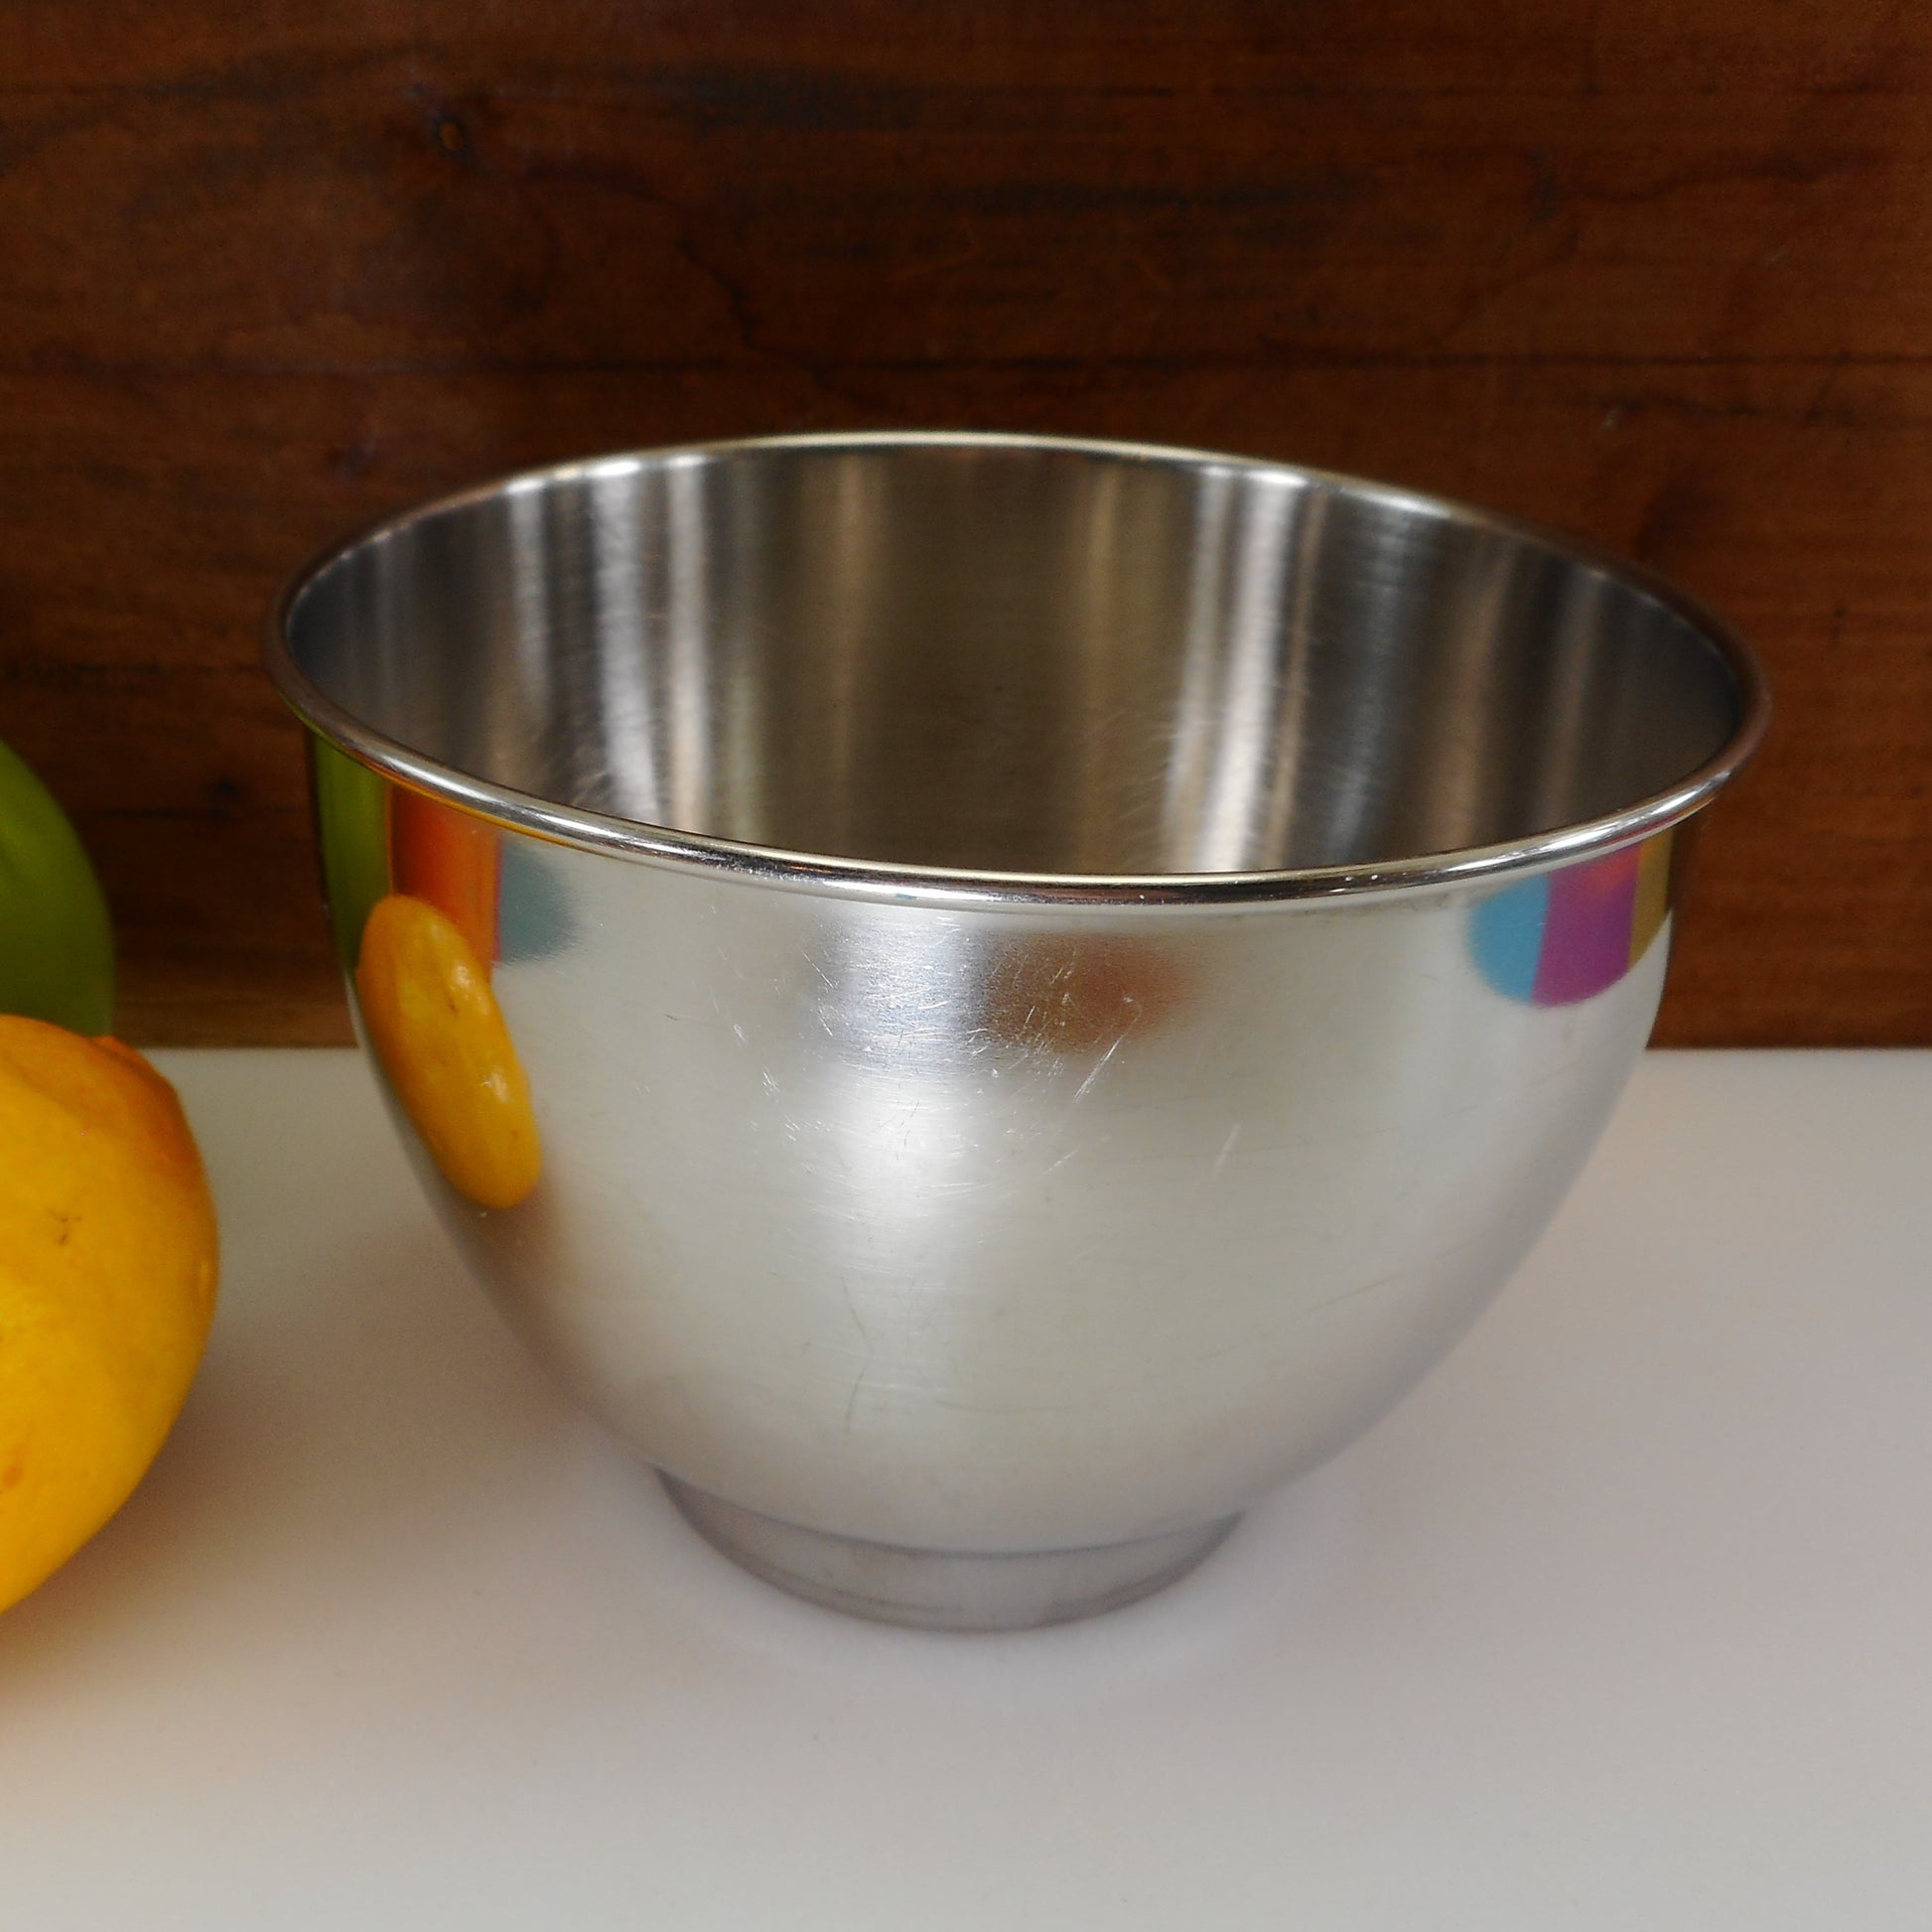 Sunbeam Mixmaster Replacement 6 small Mixing Bowl Stainless